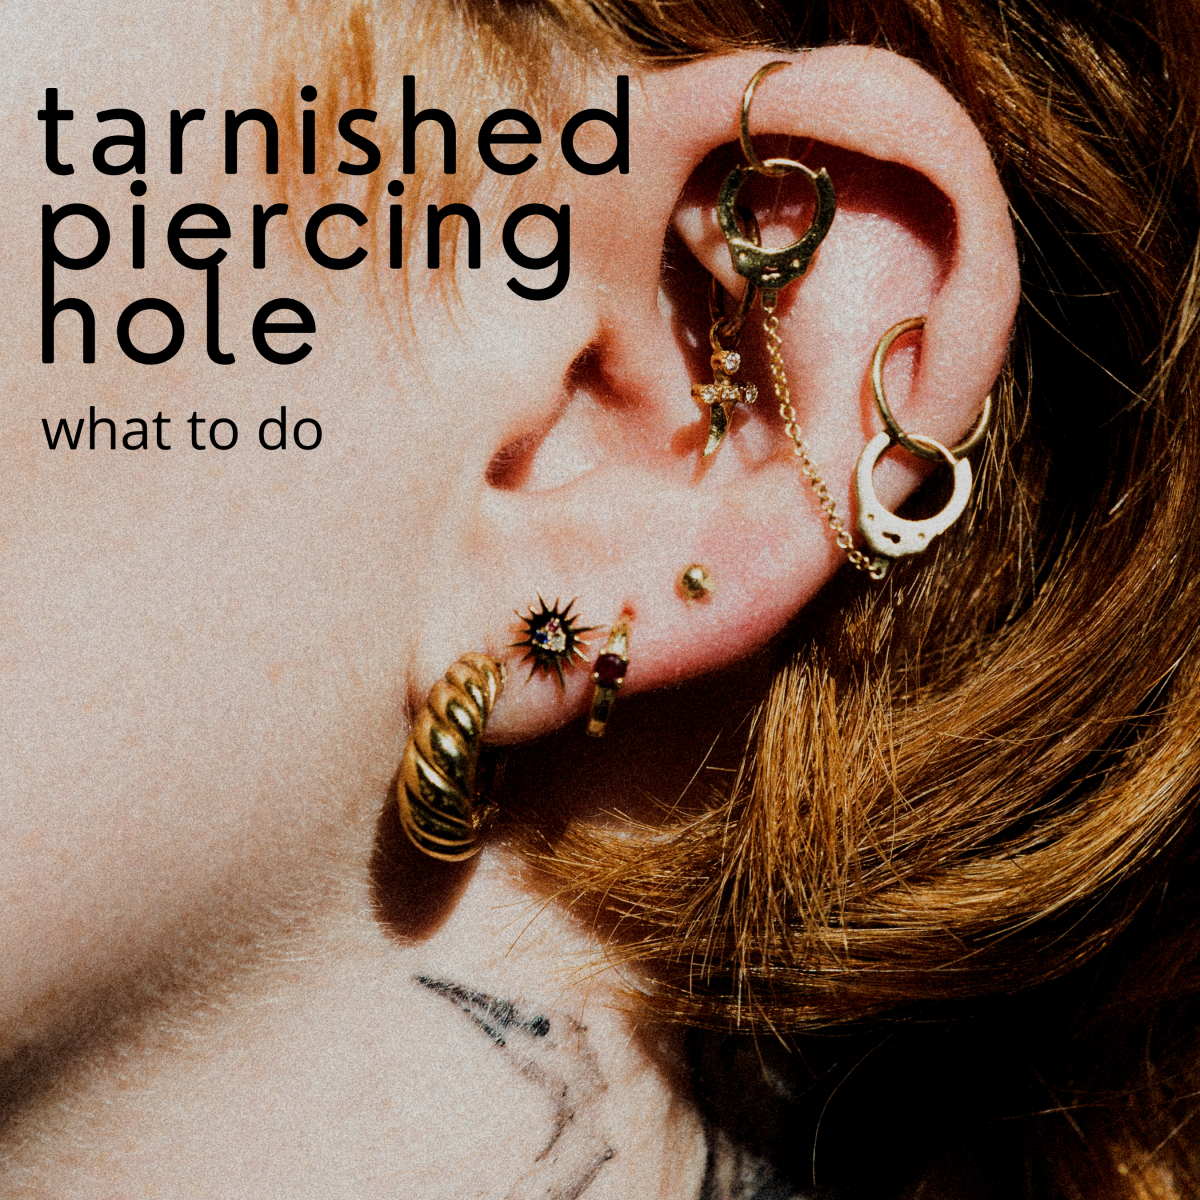 Black stuff in your piercing? It might be argyria. Learn what to do about it below.